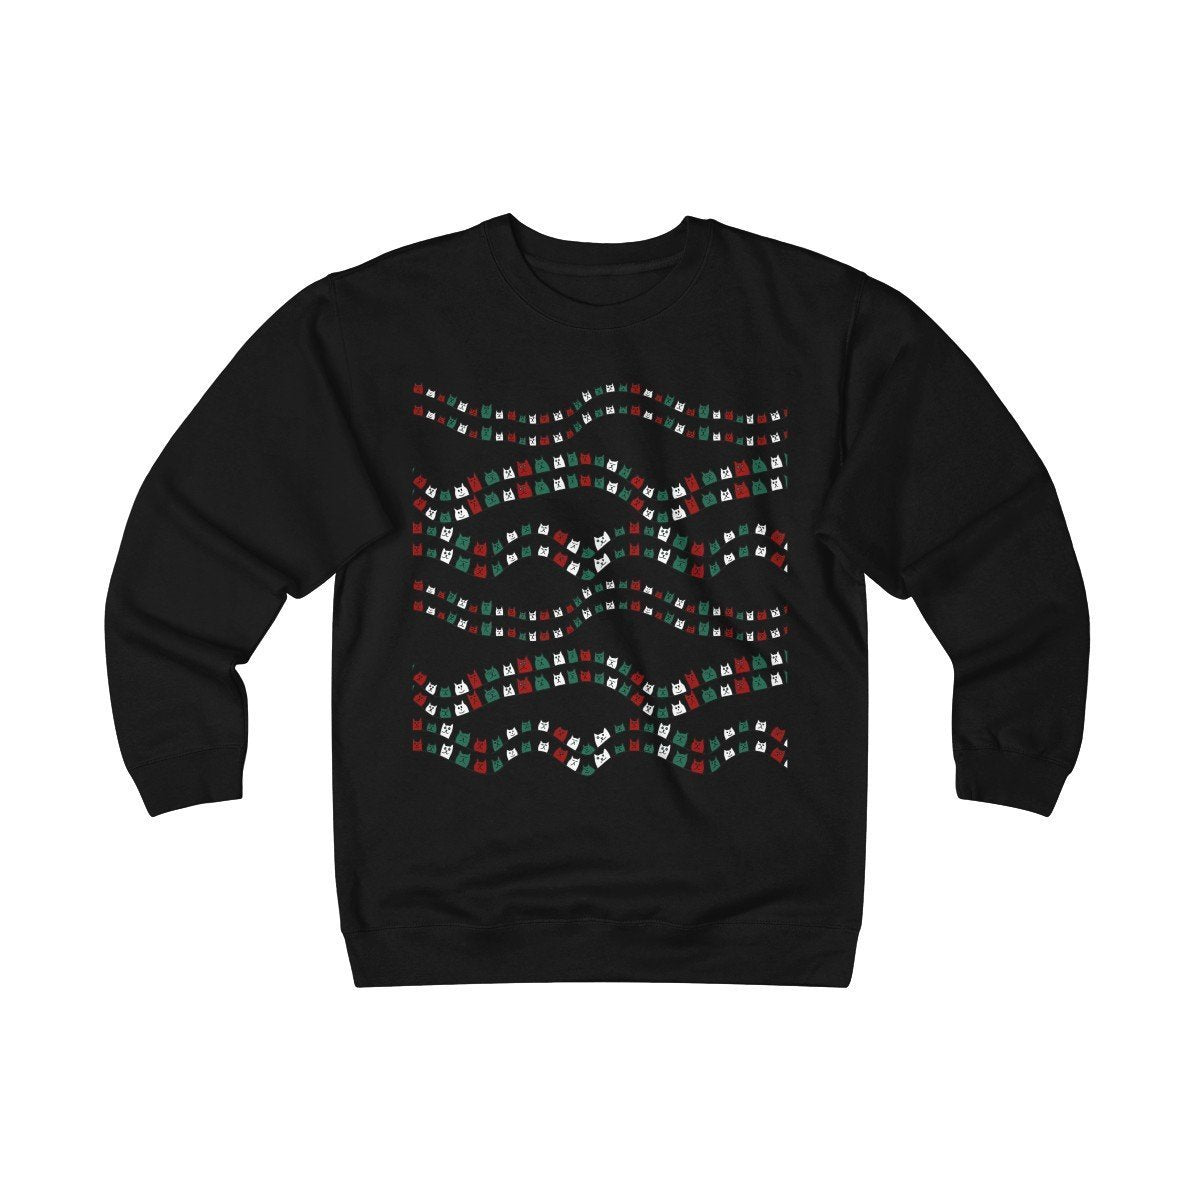 nique Christmas Gifts for Cat Lovers, Ugly Cat Christmas Sweater for Men Featuring a String of Red Green and White Cats